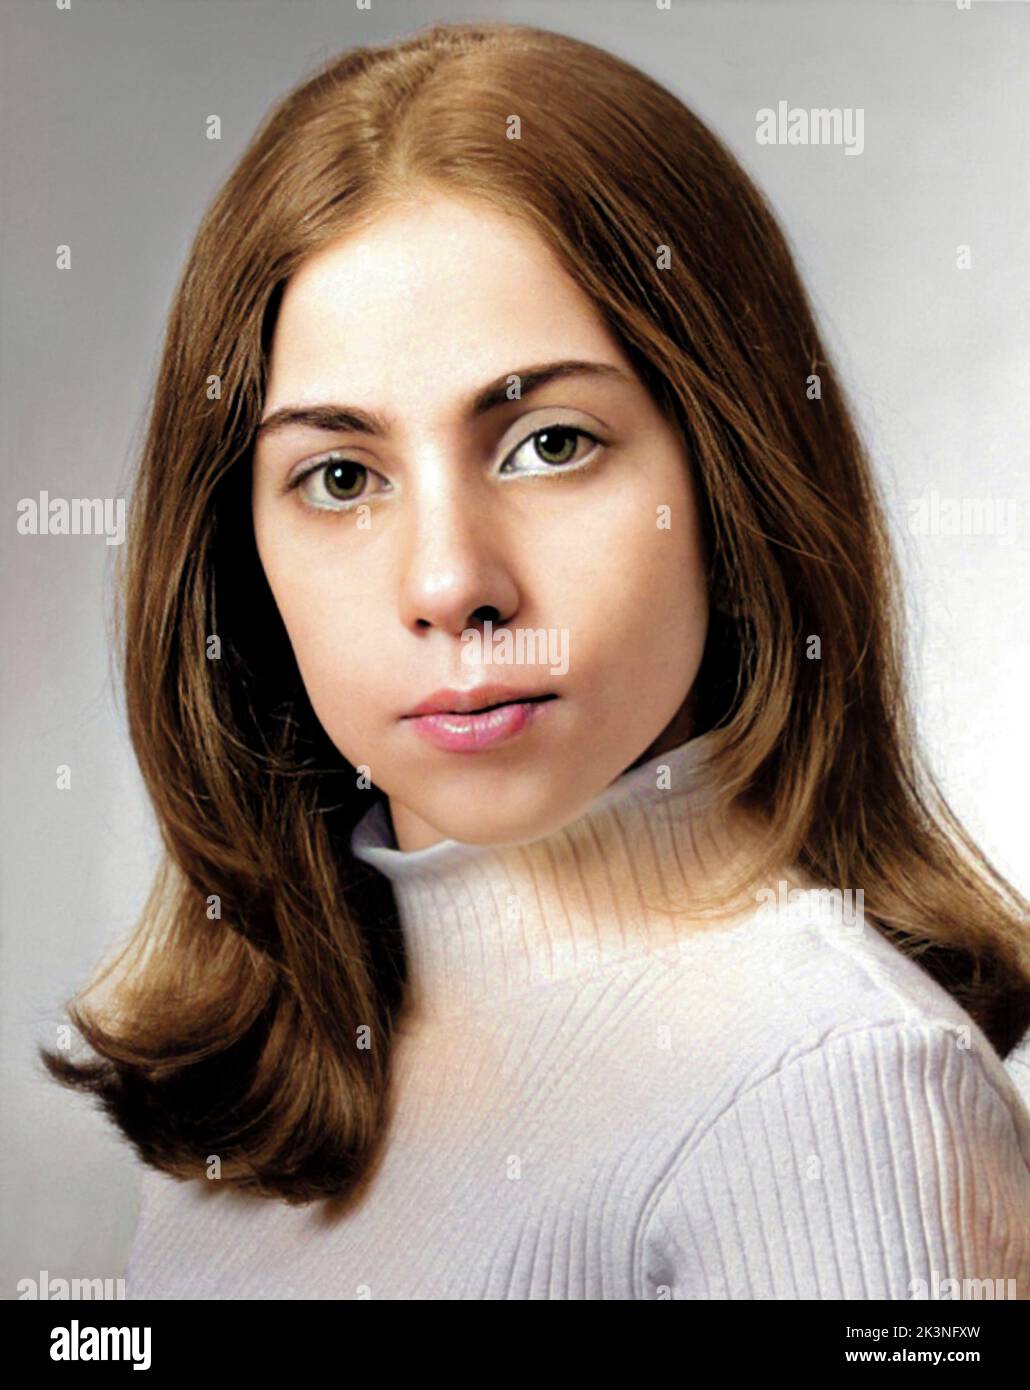 2002 , New York , USA : The celebrated american singer and actress LADY GAGA born JOANNE ANGELINA GERMANOTTA ( born 28 march 1986 ) when was a young girl aged 16 , photo from the annuary HIGH SCHOOL YEARBOOK . Unknown photographer . DIGITALLY COLORIZED . - HISTORY - FOTO STORICHE - ATTORE - MOVIE - CINEMA - SEX SYMBOL - personalità da bambino bambini bambina da giovane - personality personalities when was young - INFANZIA - CHILDHOOD - TEENAGER  - POP MUSIC - MUSICA - cantante  - PORTRAIT - RITRATTO --- ARCHIVIO GBB Stock Photo